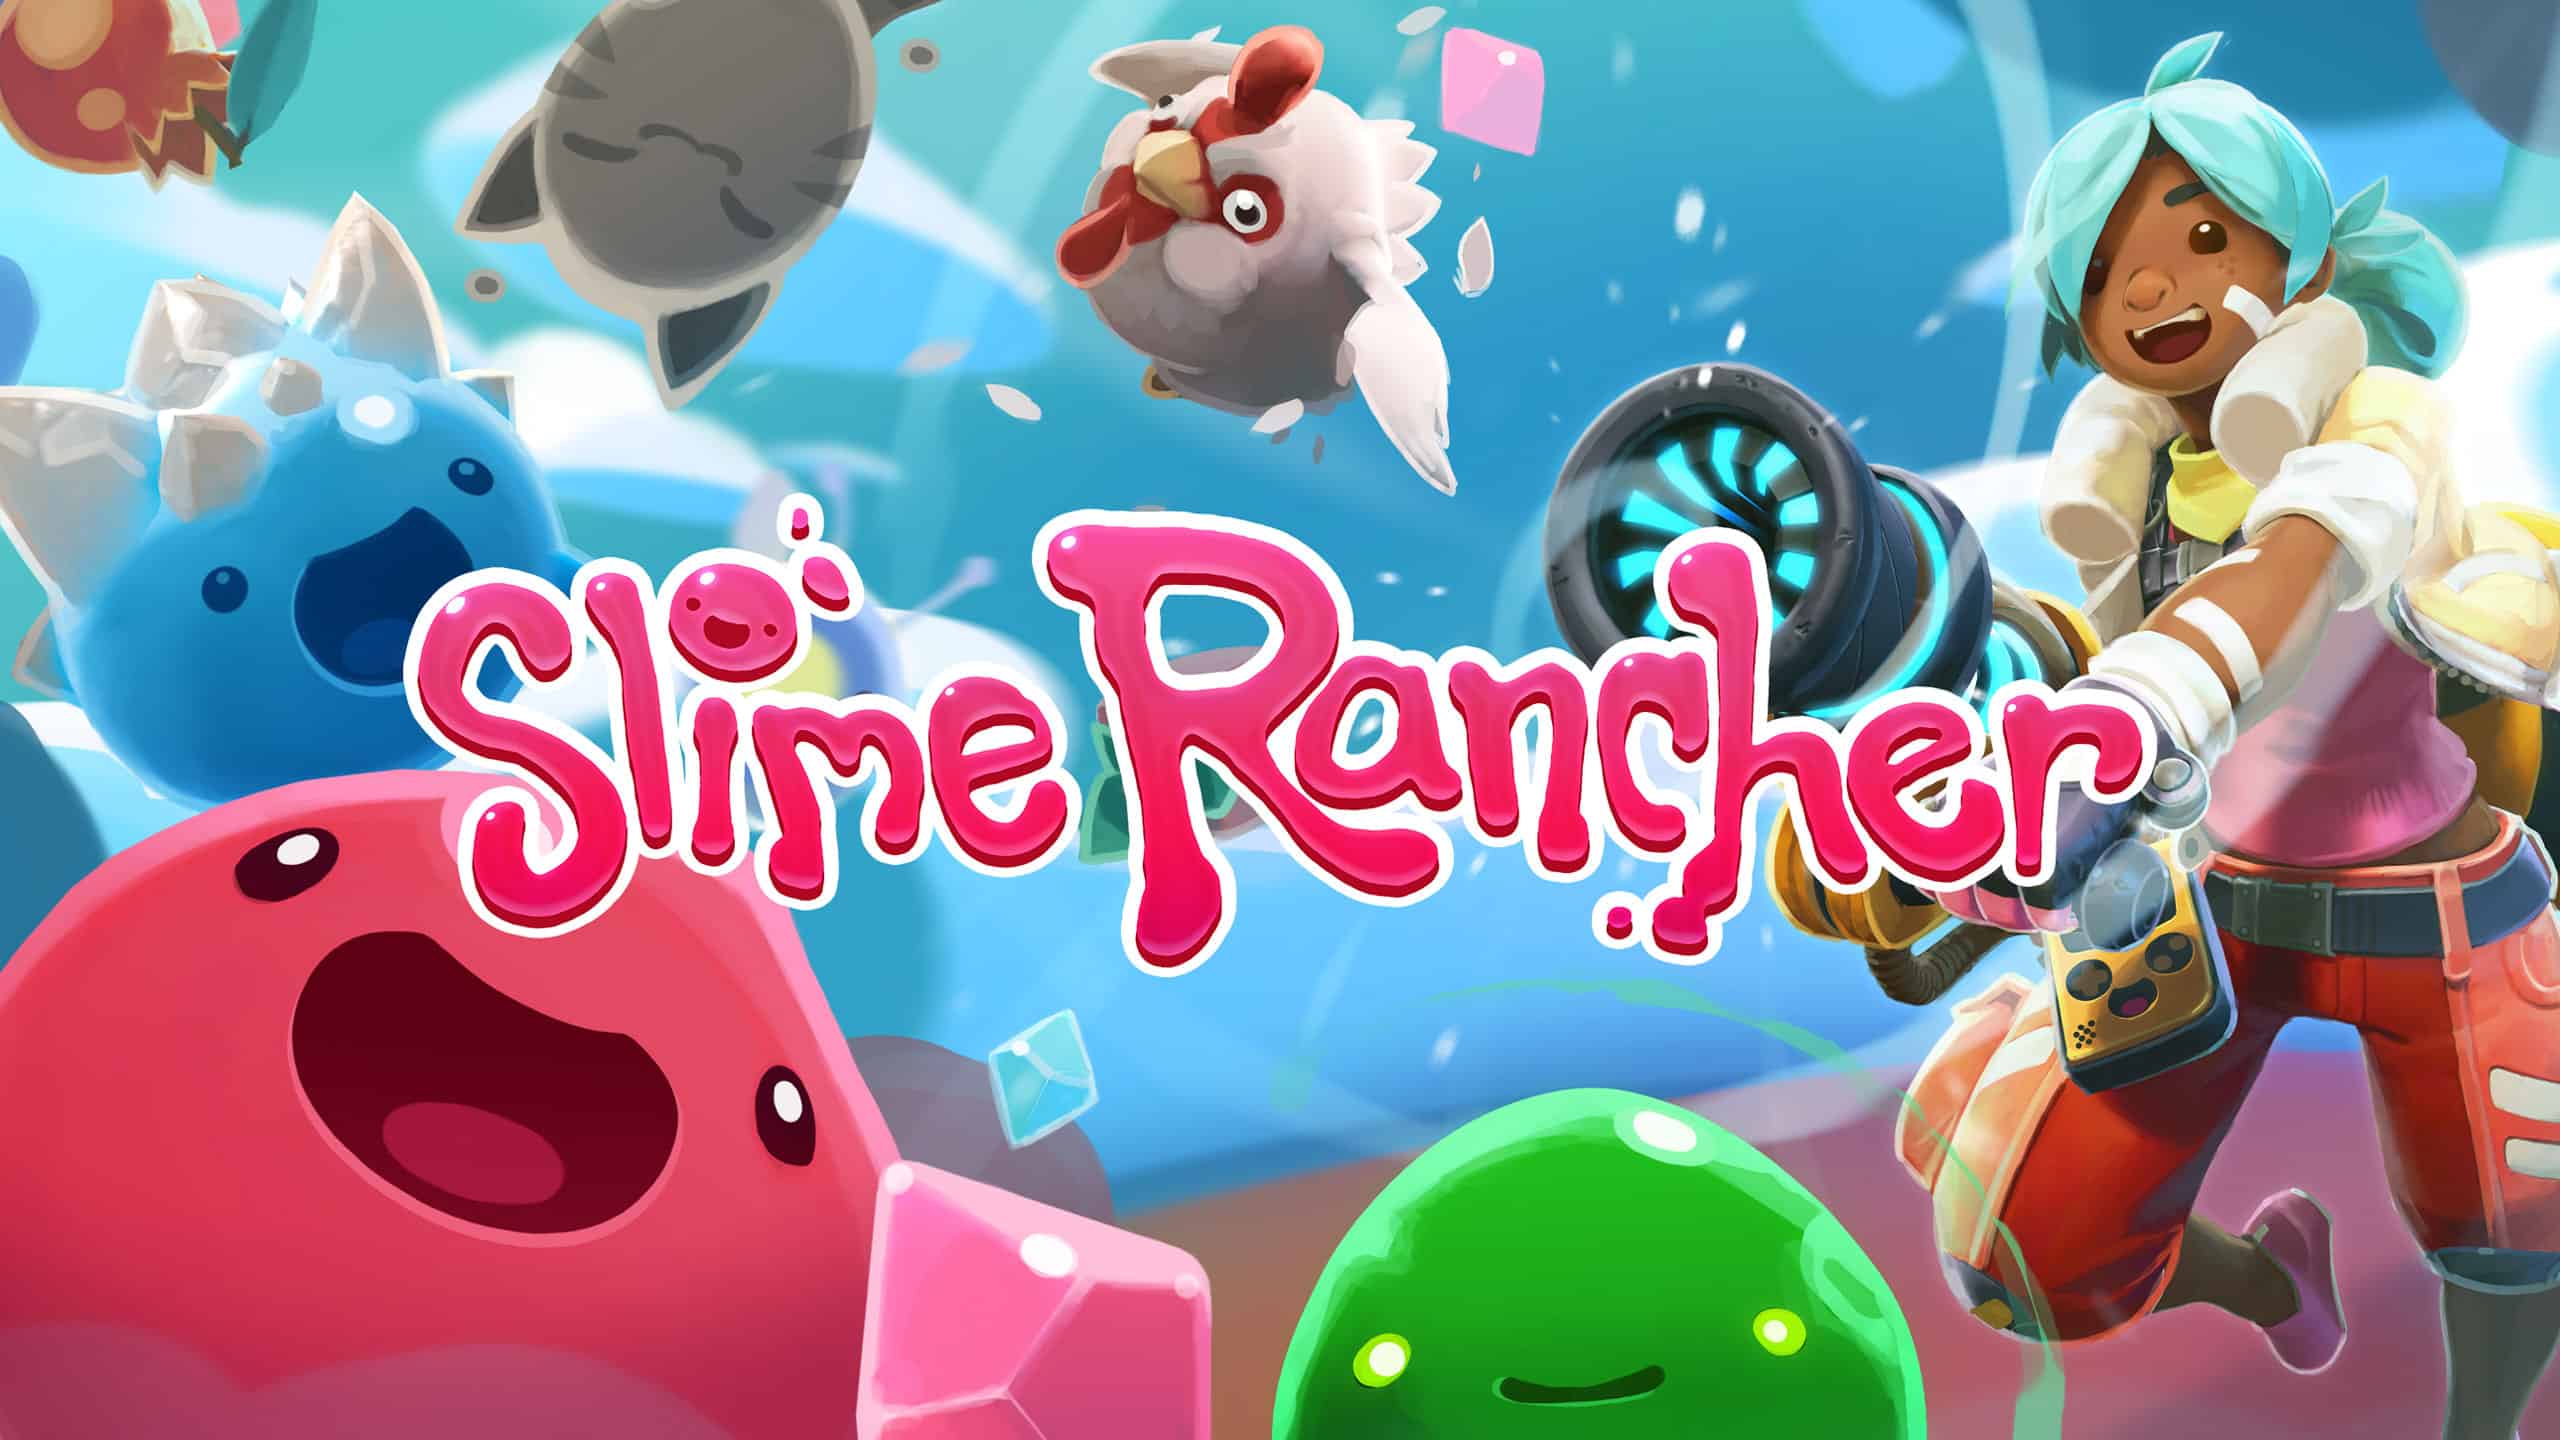 Slime Rancher 2 Cheats & Trainers for PC